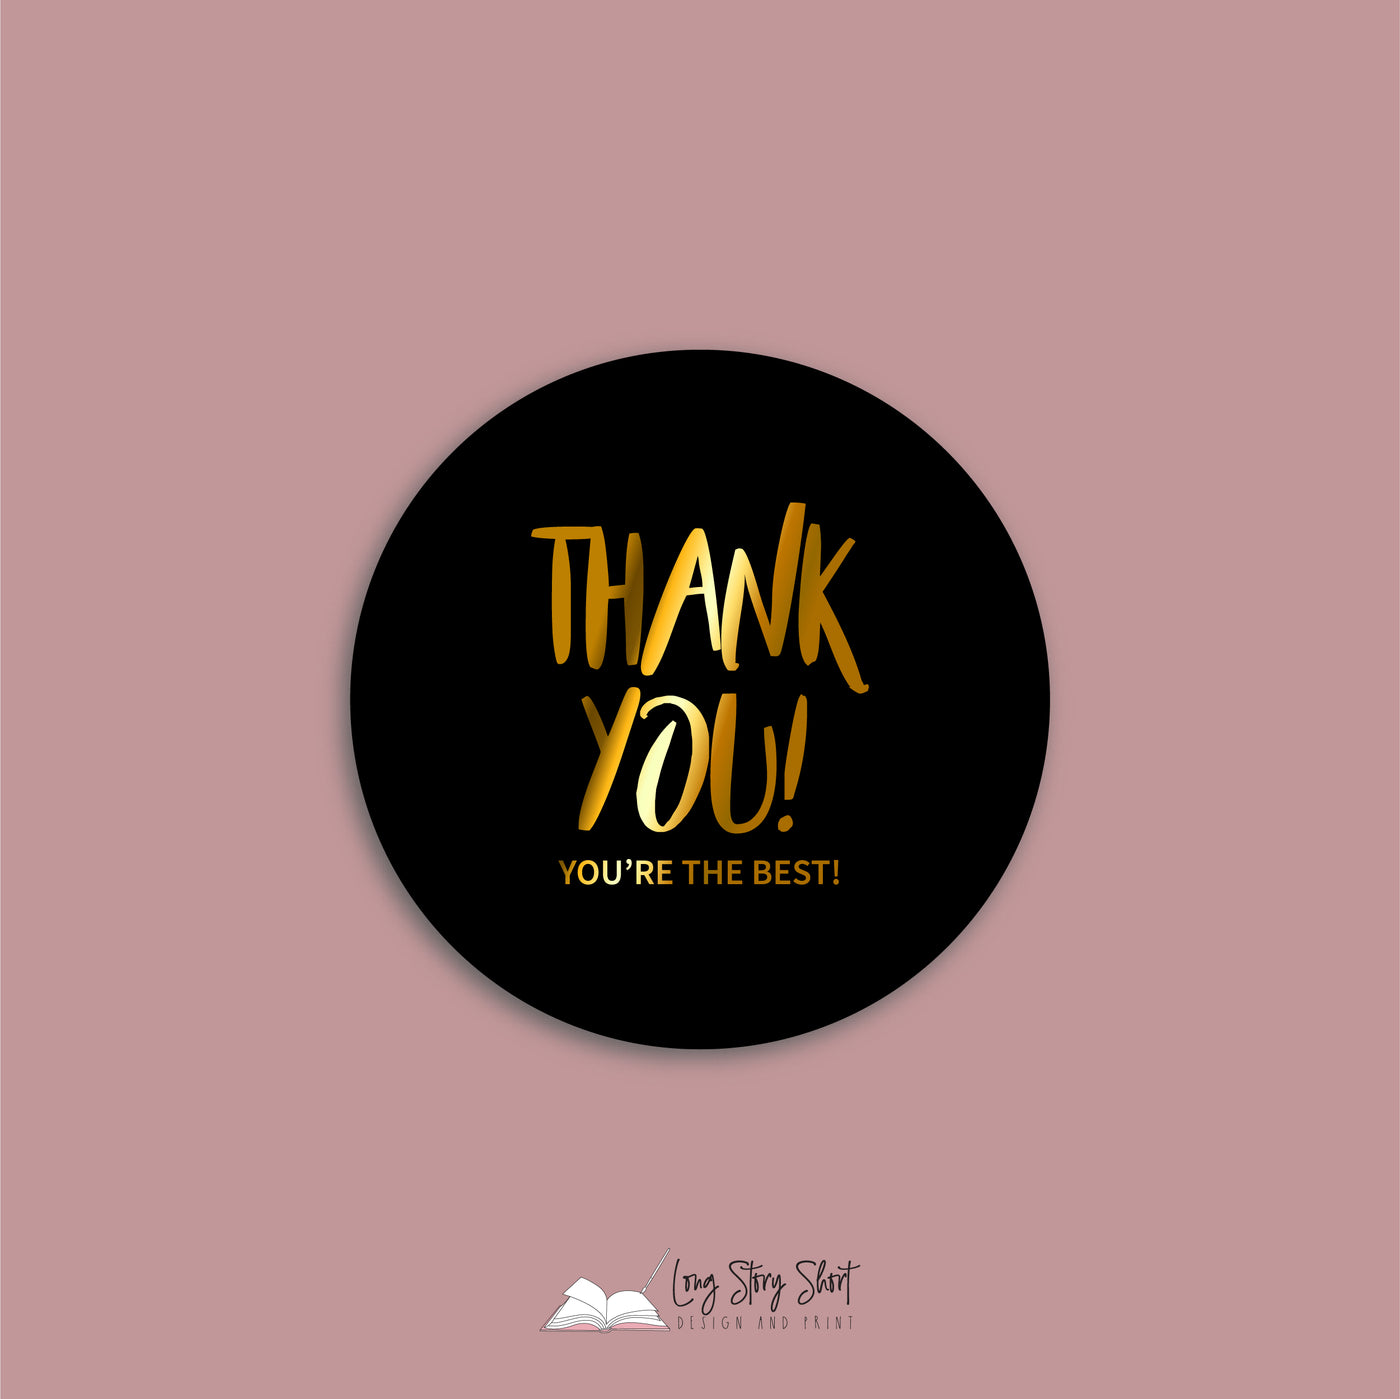 FOILED Thank you! You're the Best! Vinyl Label Pack